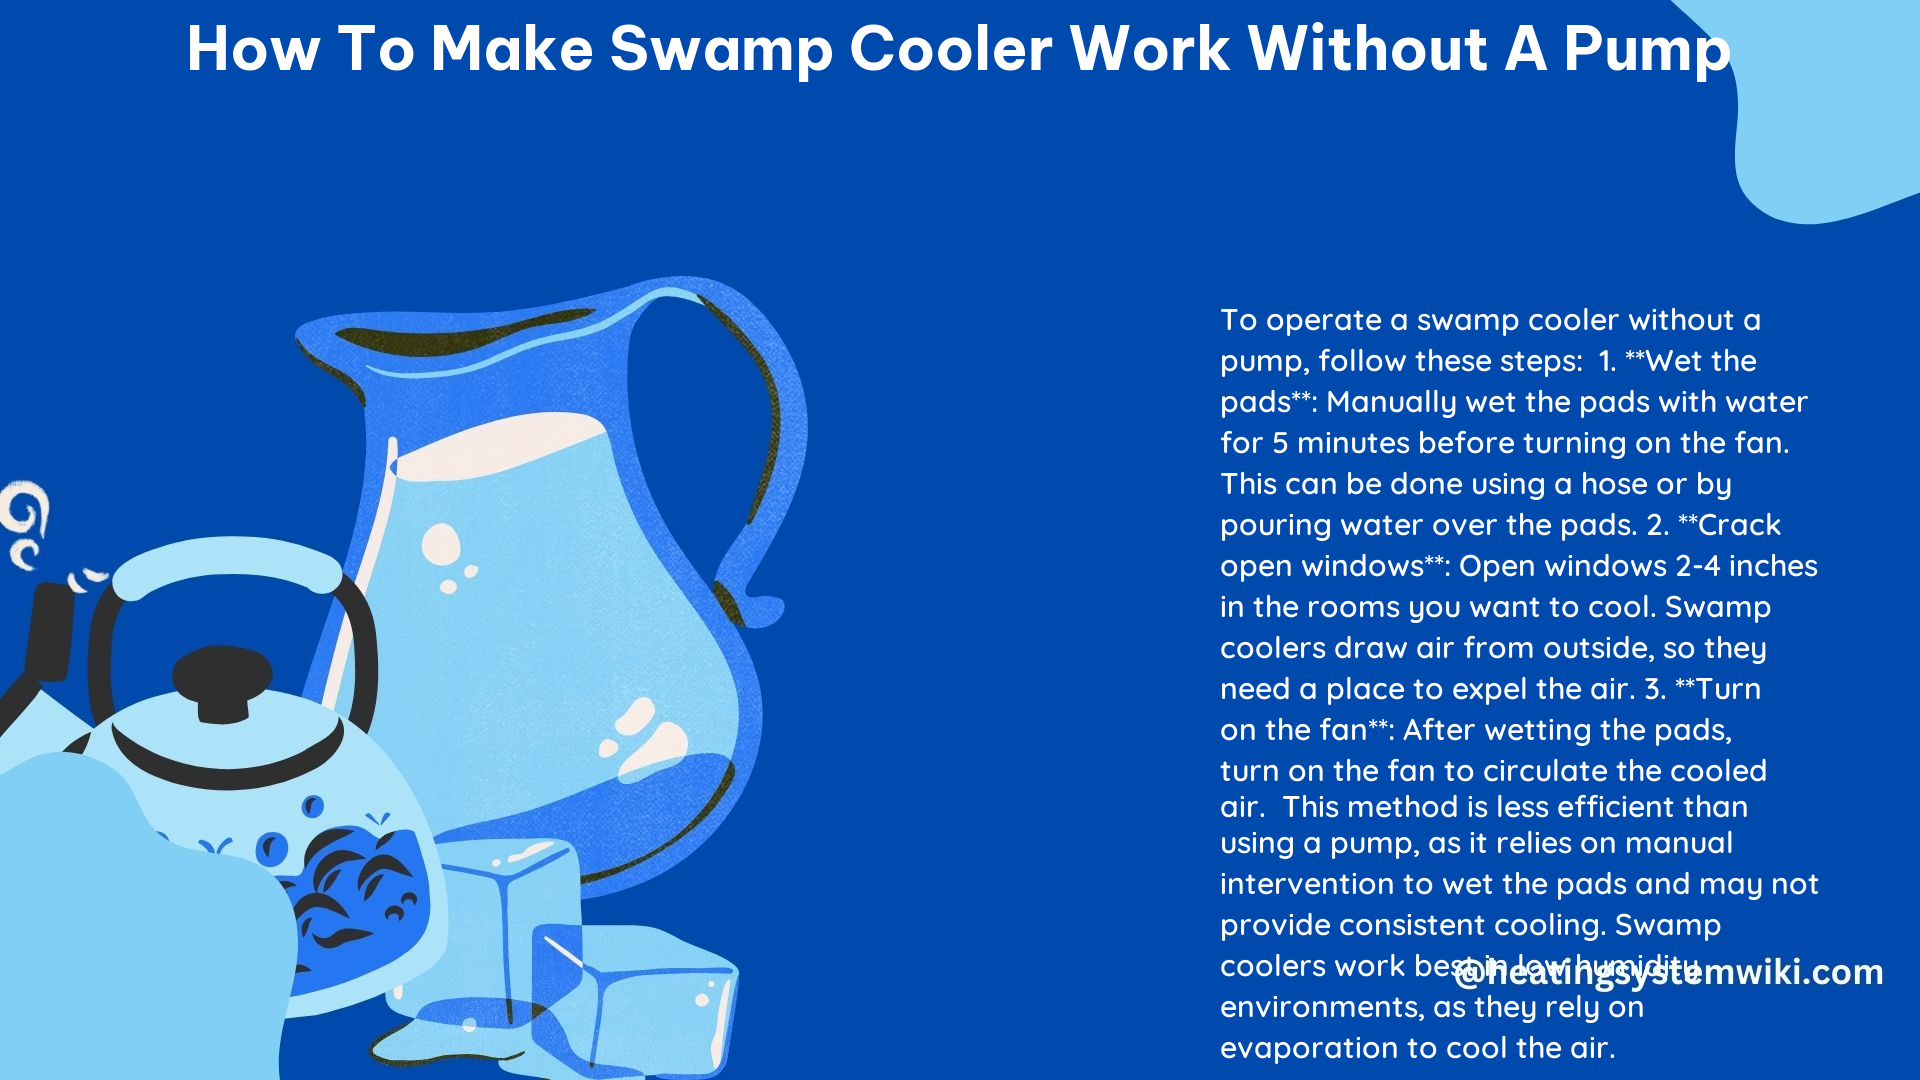 How to Make Swamp Cooler Work Without a Pump